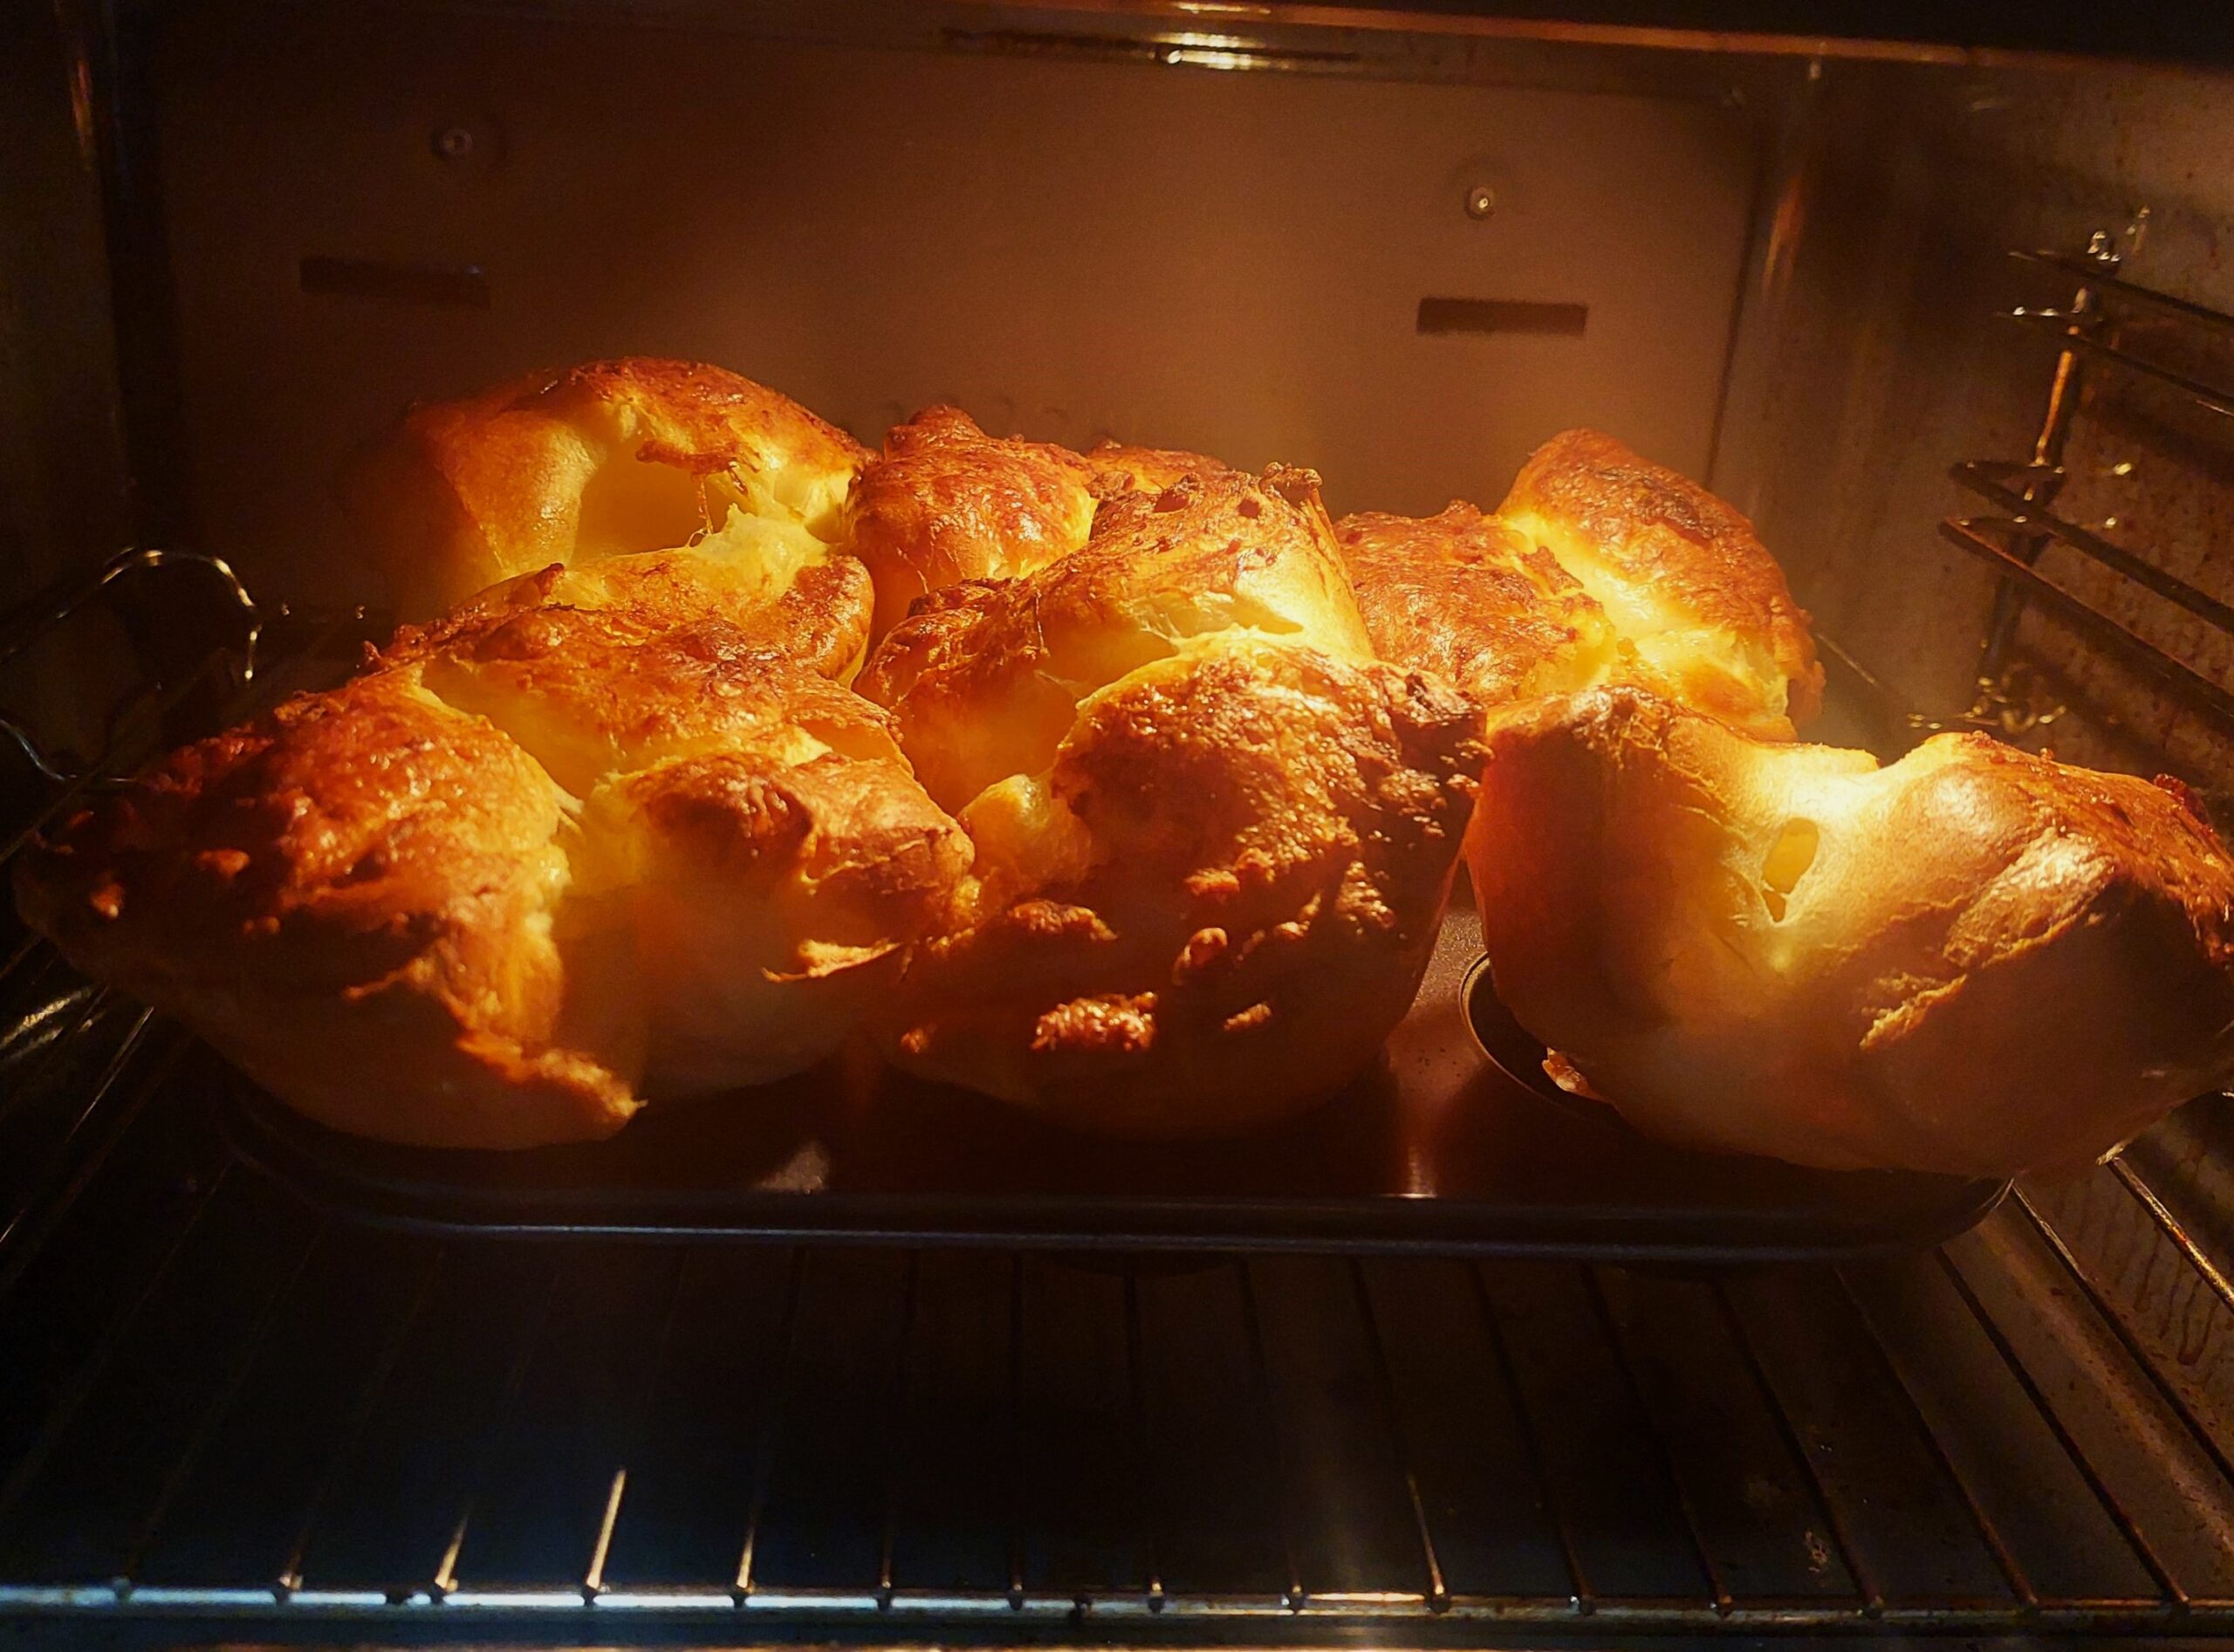 Yorkshire Pudding coming out of the Oven